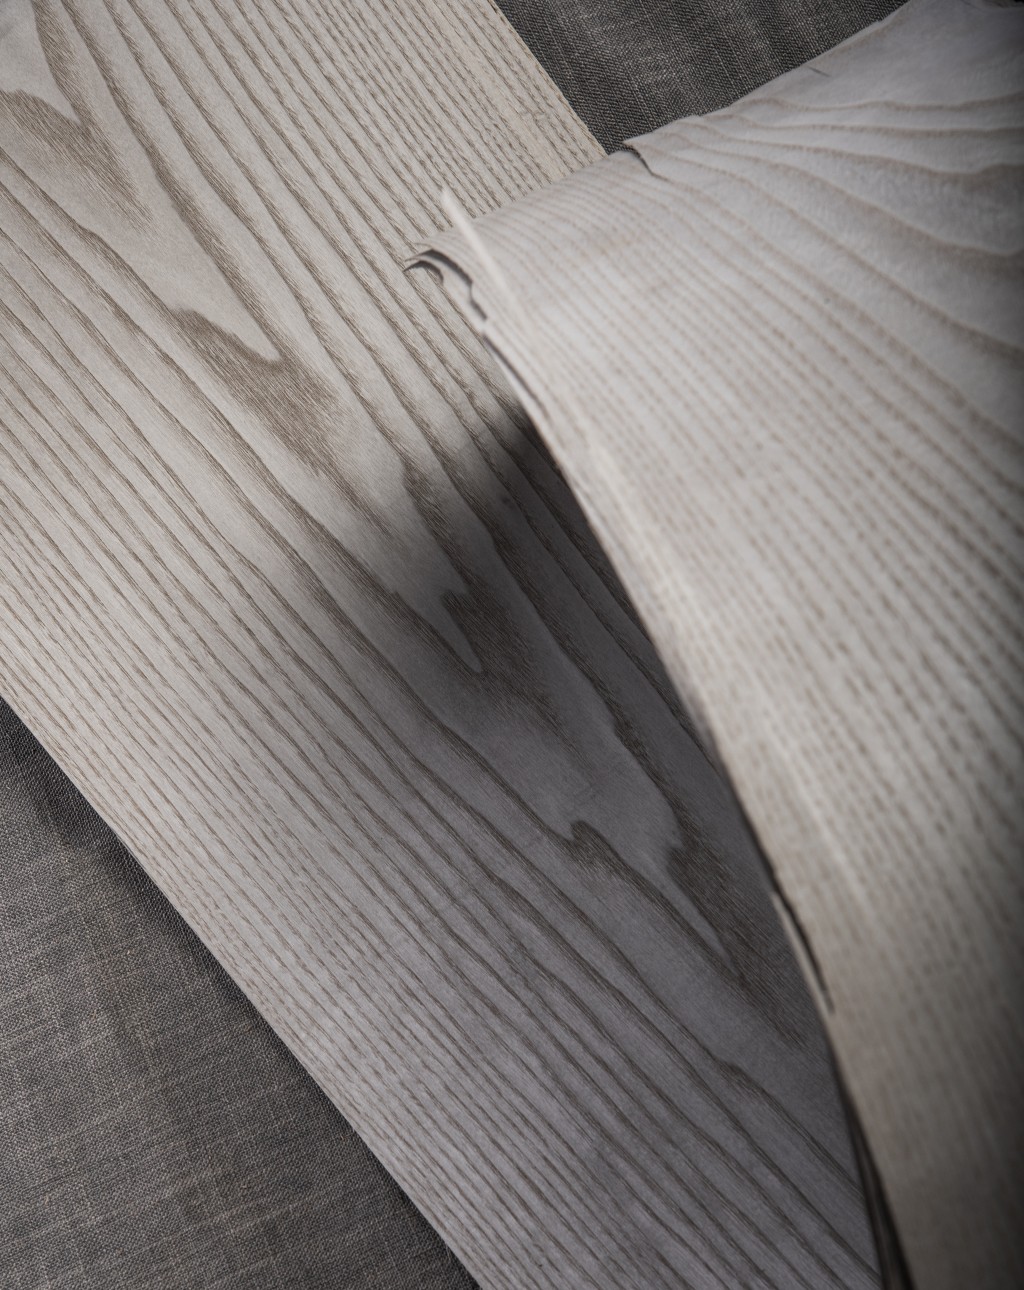 About Venzo Wood